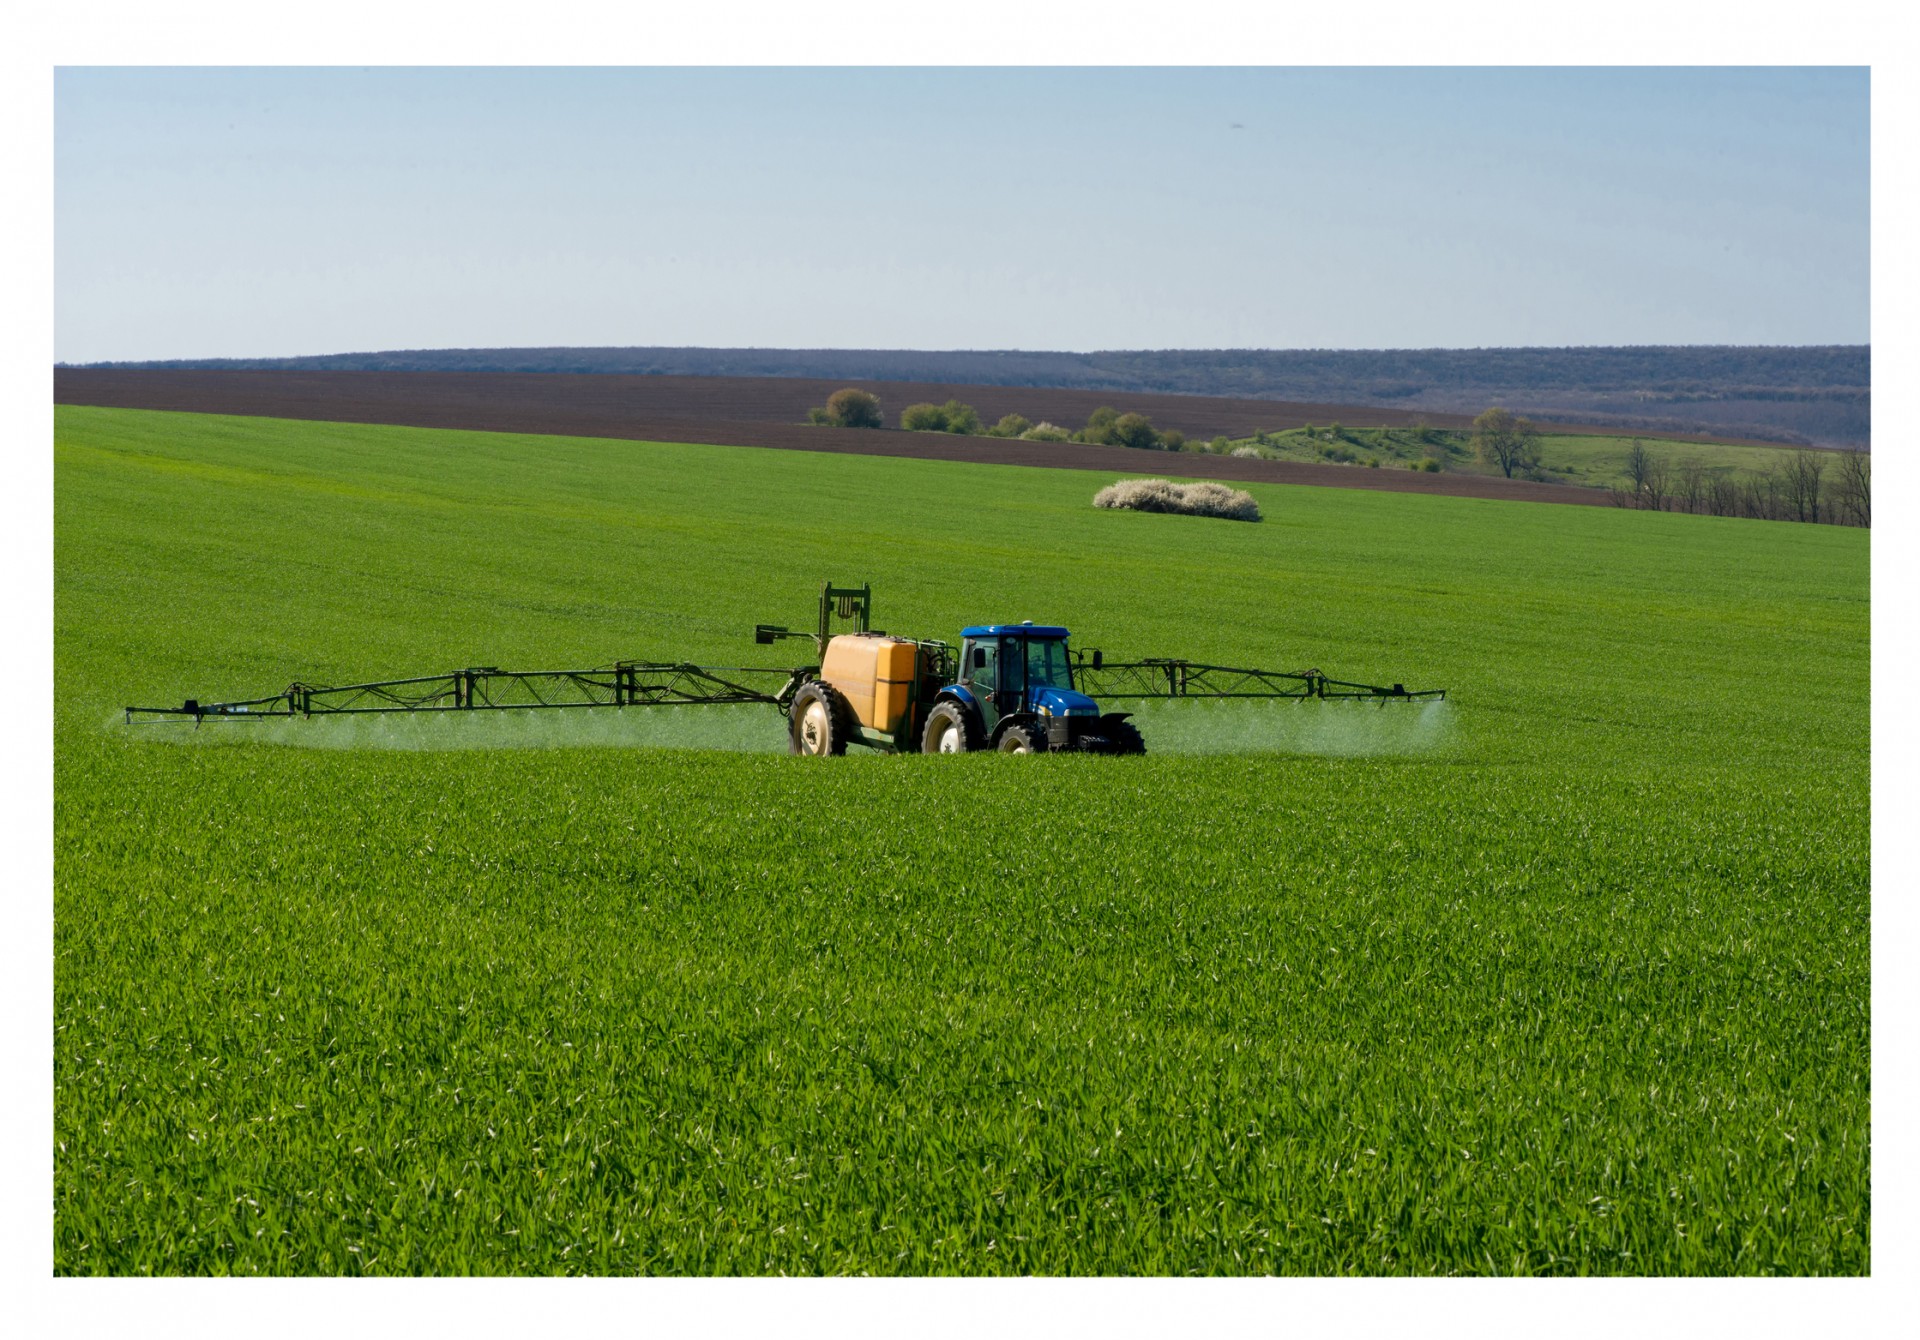 Tractor spraying pesticide in a field of wheat